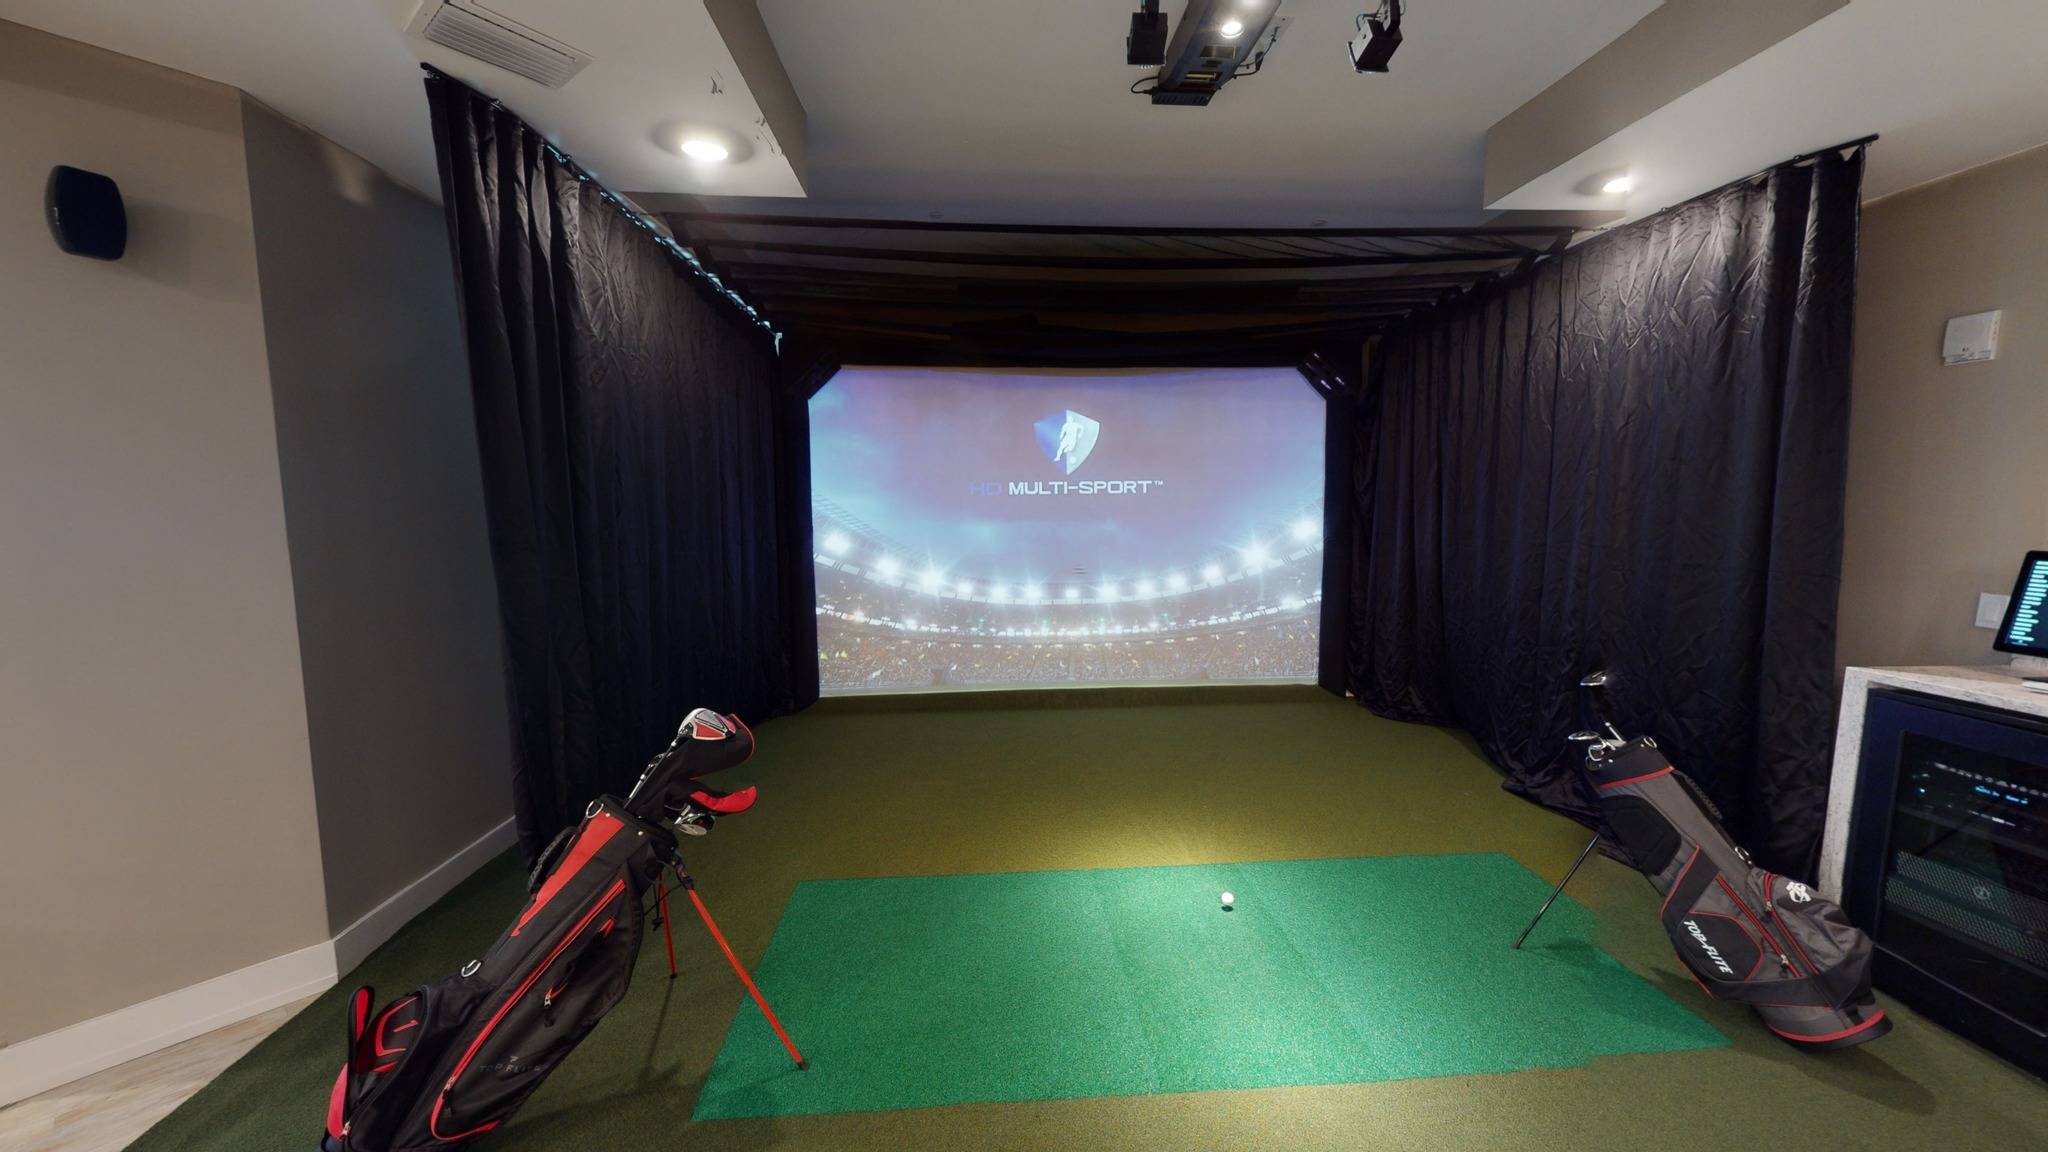 Triton-Cay-Ft. Myers - Clubhouse Golf Simulator